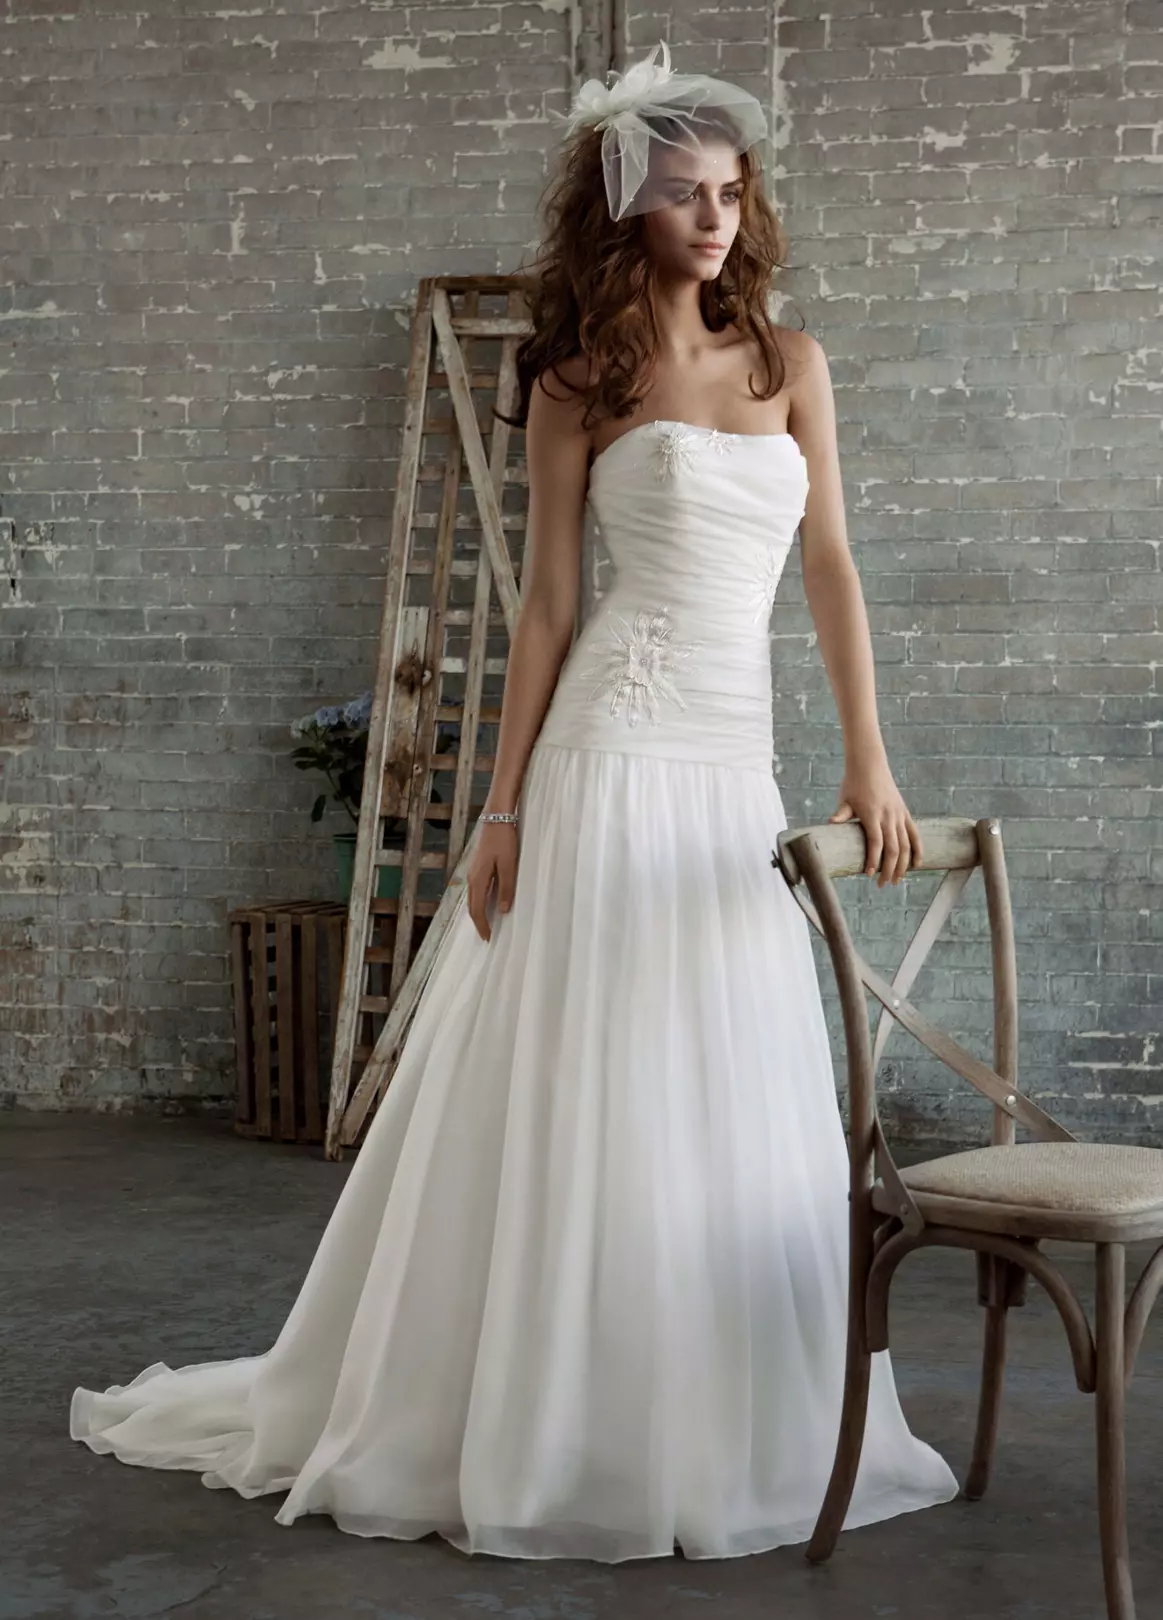 Gossamer Gown with Drop Waist and Floral Appliques Image